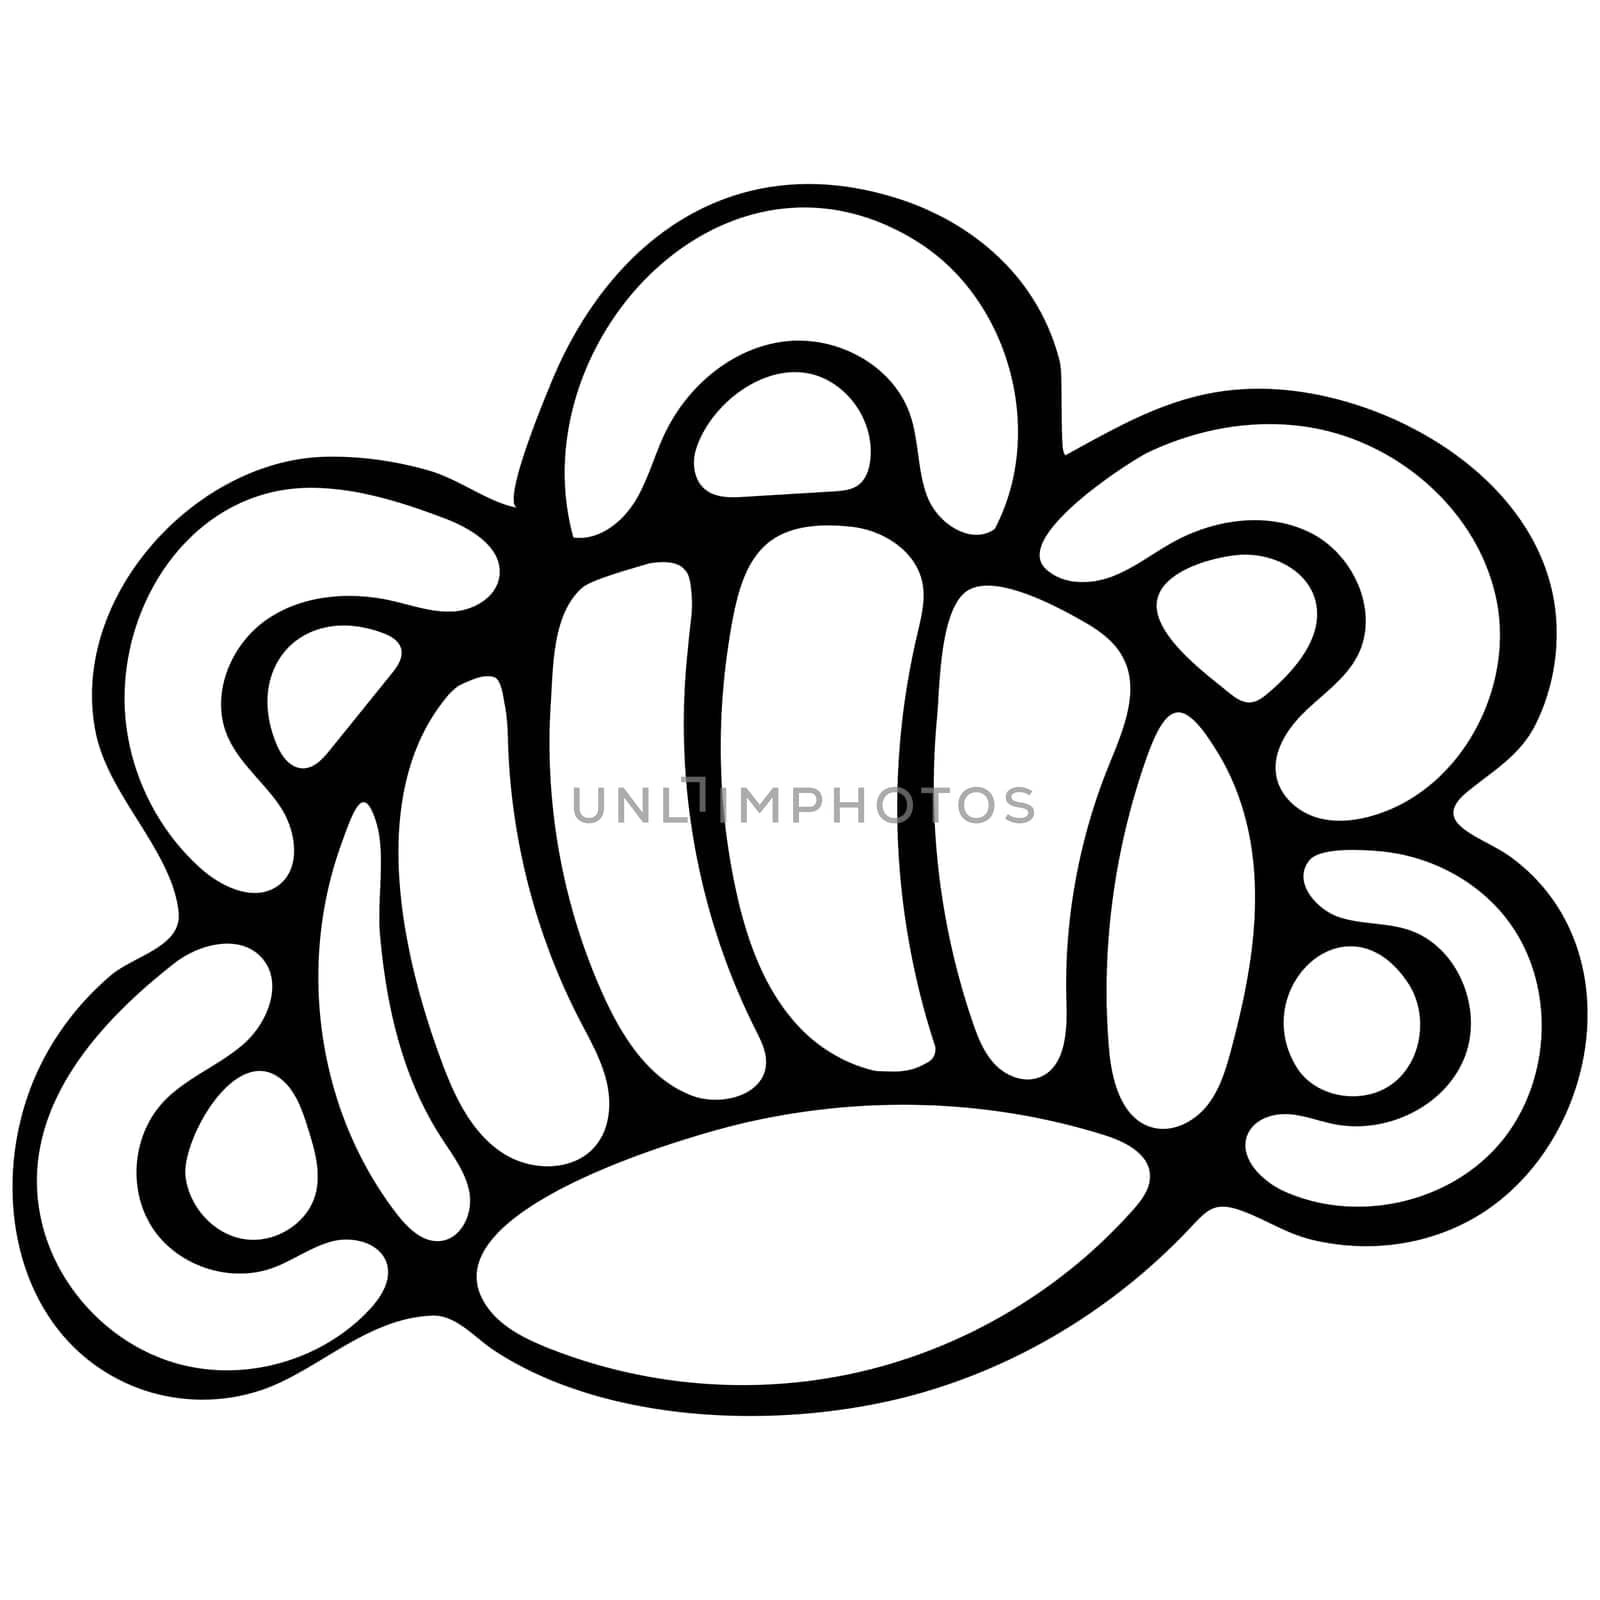 Flower Icon. Hand Drawn Simple Black Outline Floral Illustration. Clip Art in Doodle Style Isolated on White Background. by Rina_Dozornaya